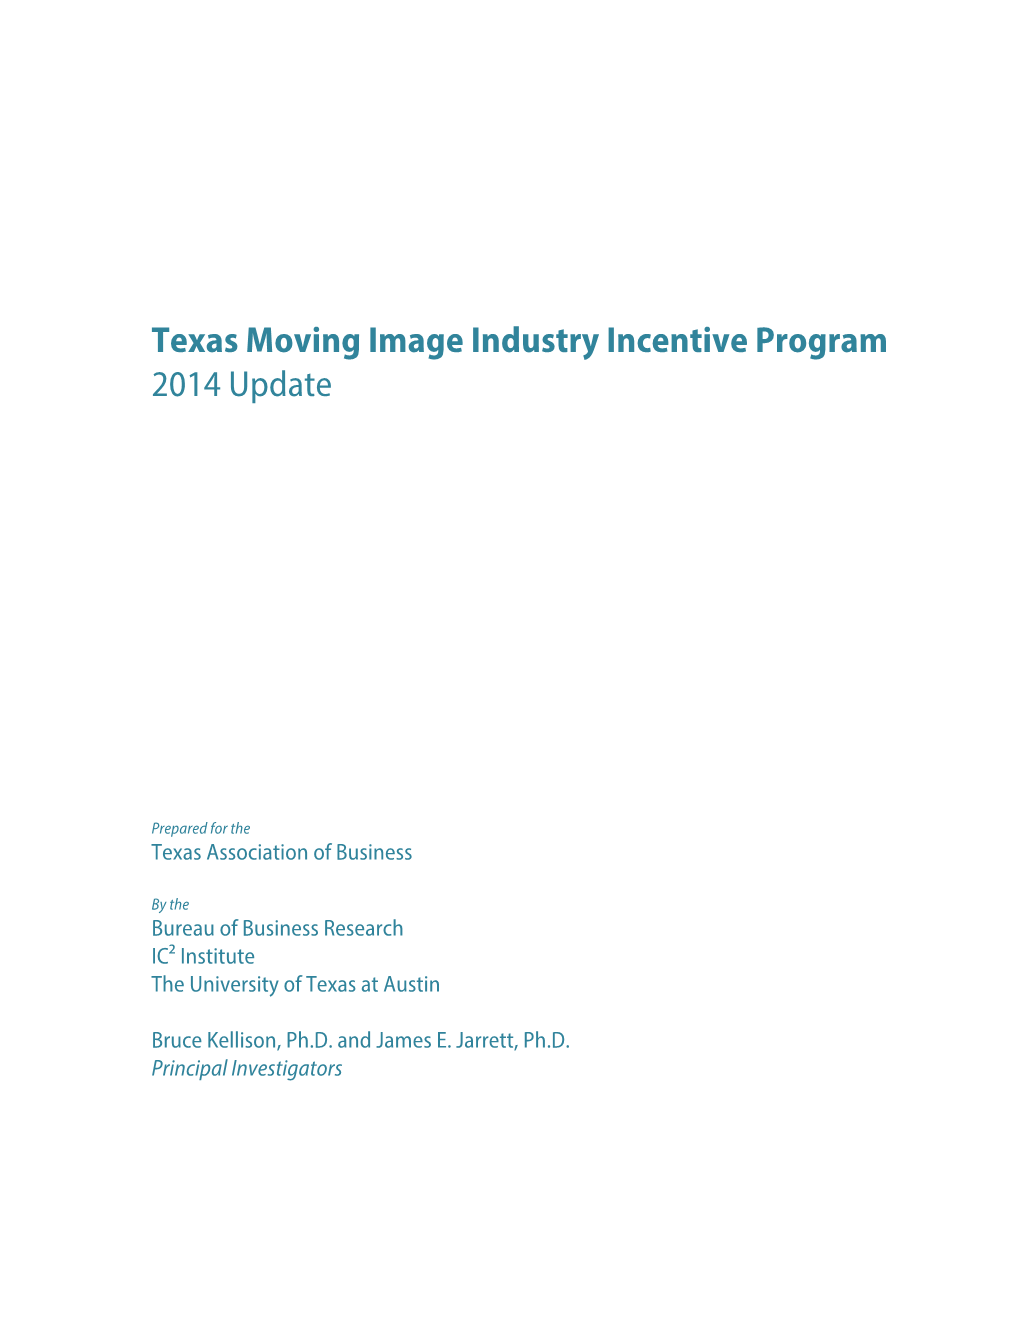 Texas Moving Image Industry Incentive Program 2014 Update